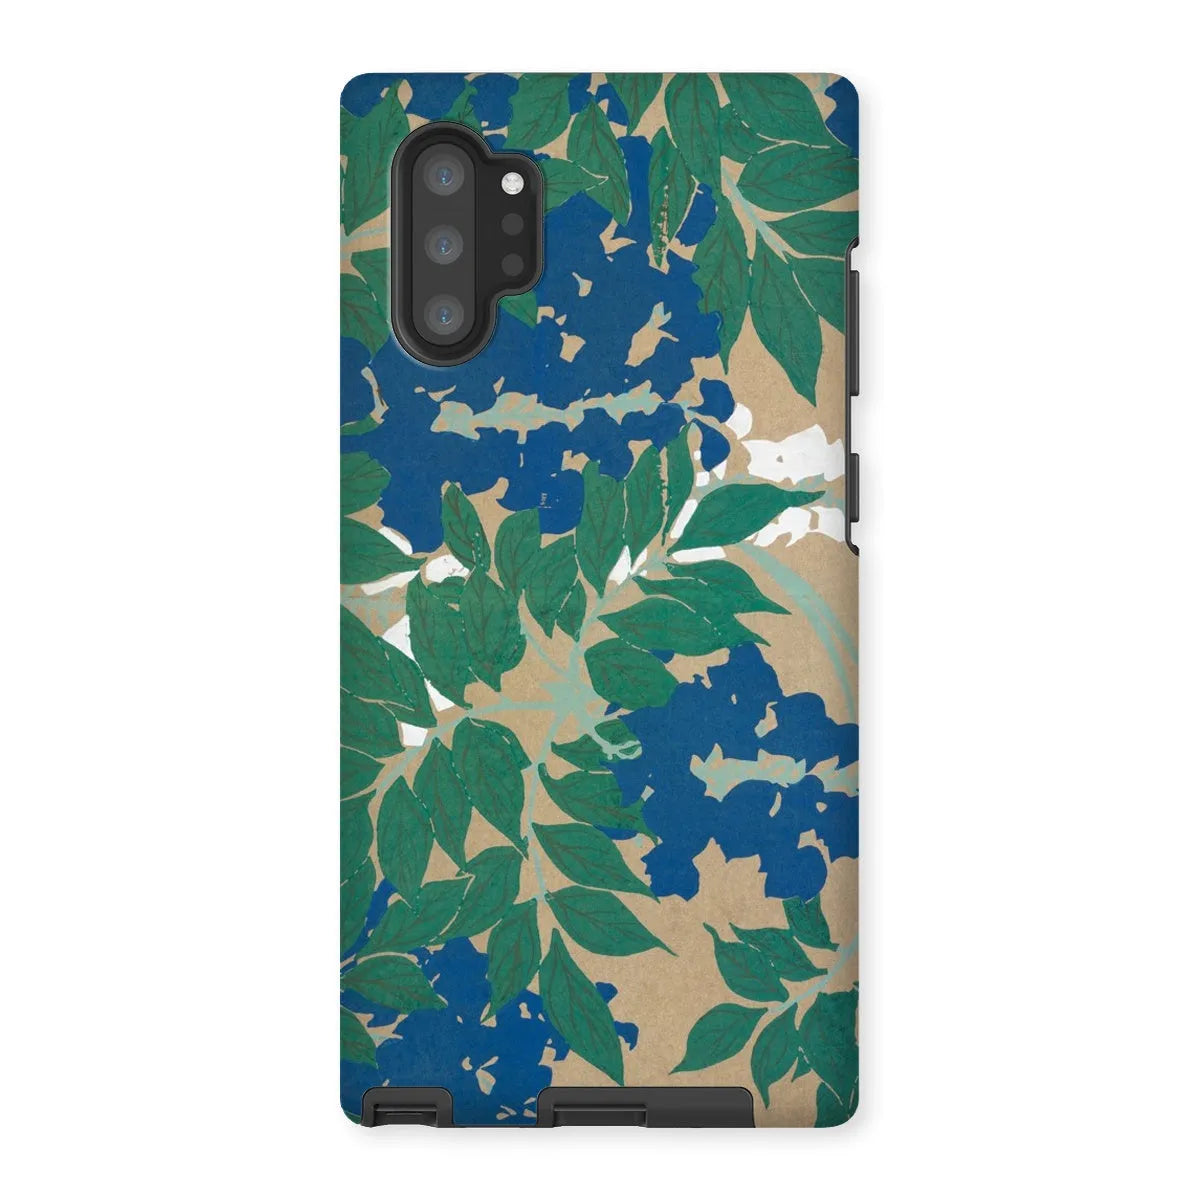 Wisteria From Momoyogusa - Floral Phone Case - Kamisaka Sekka - Samsung Galaxy Note 10p / Matte - Mobile Phone Cases